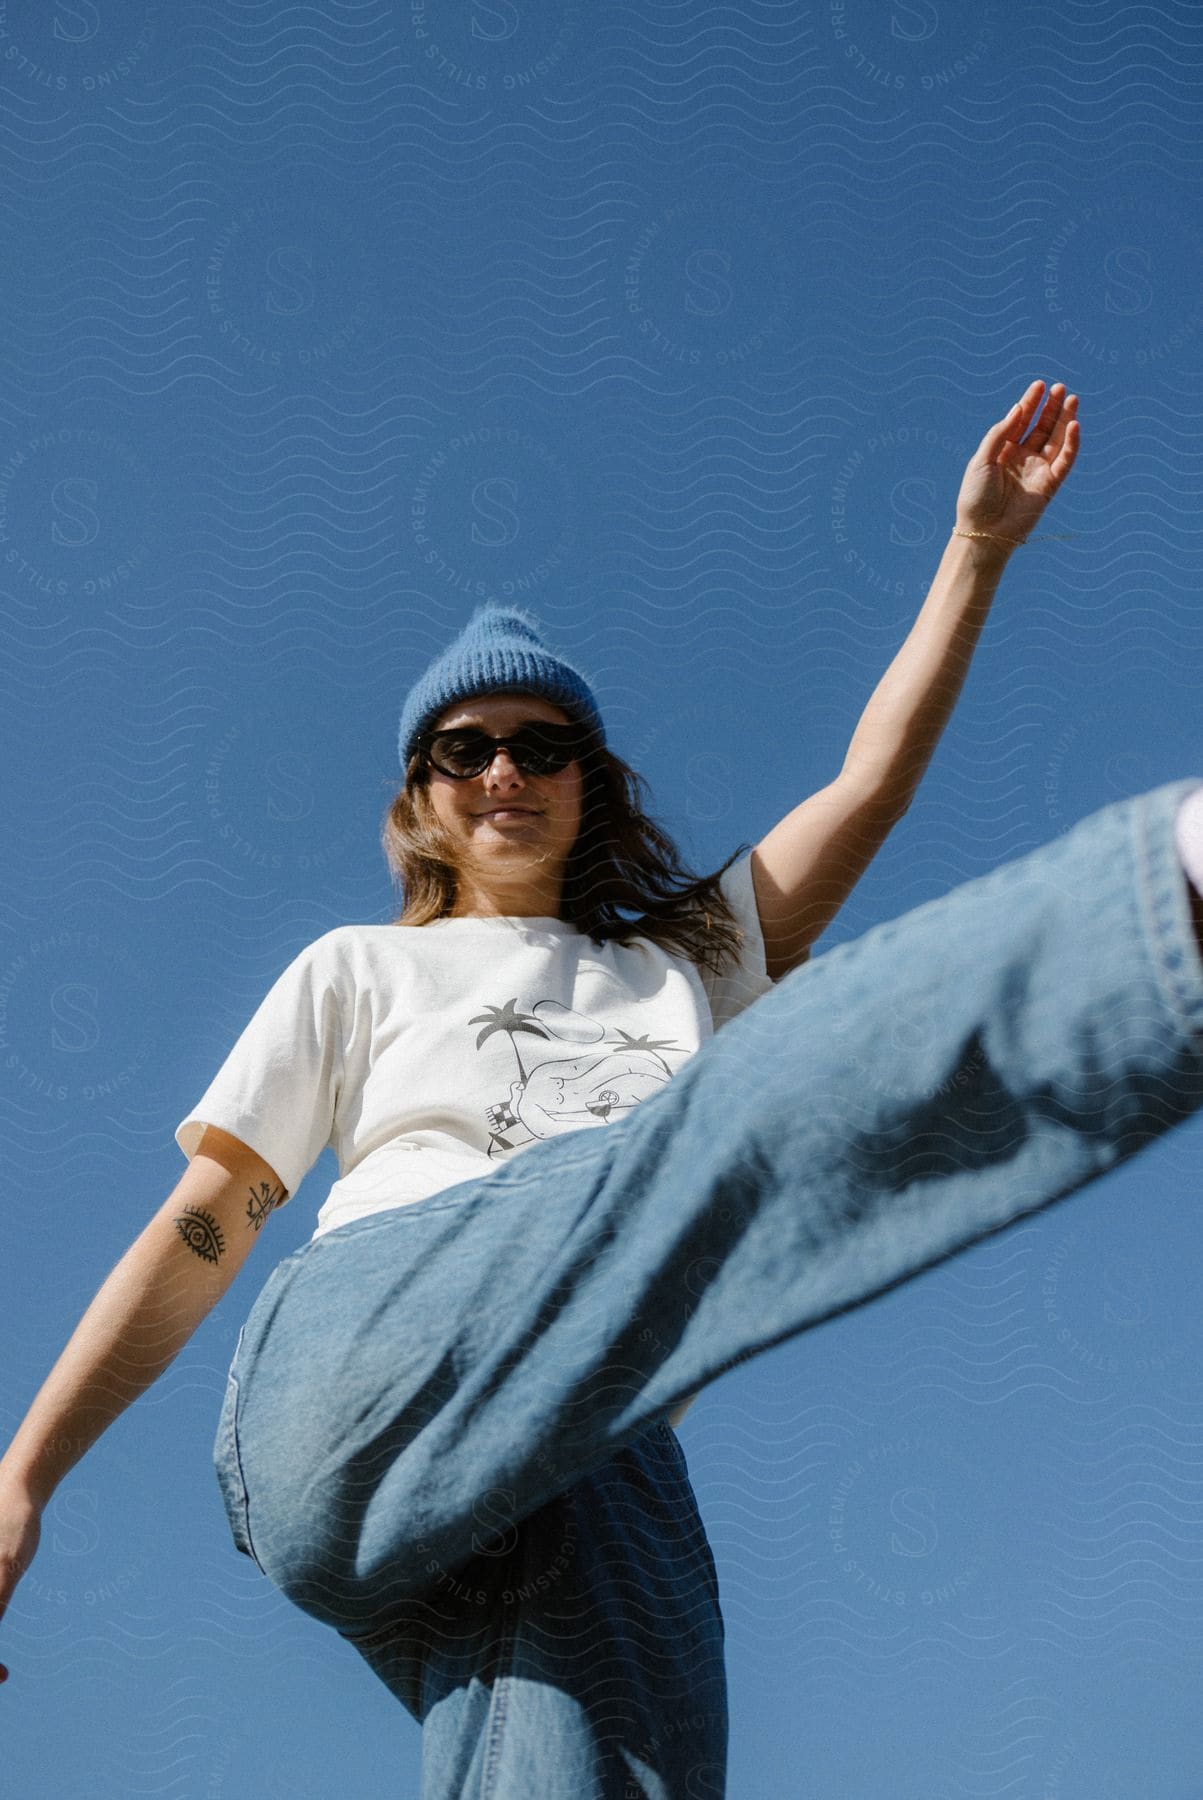 The sun shines on a woman wearing sunglasses and a knit hat standing on one leg under a clear blue sky with one arm and a leg in the air